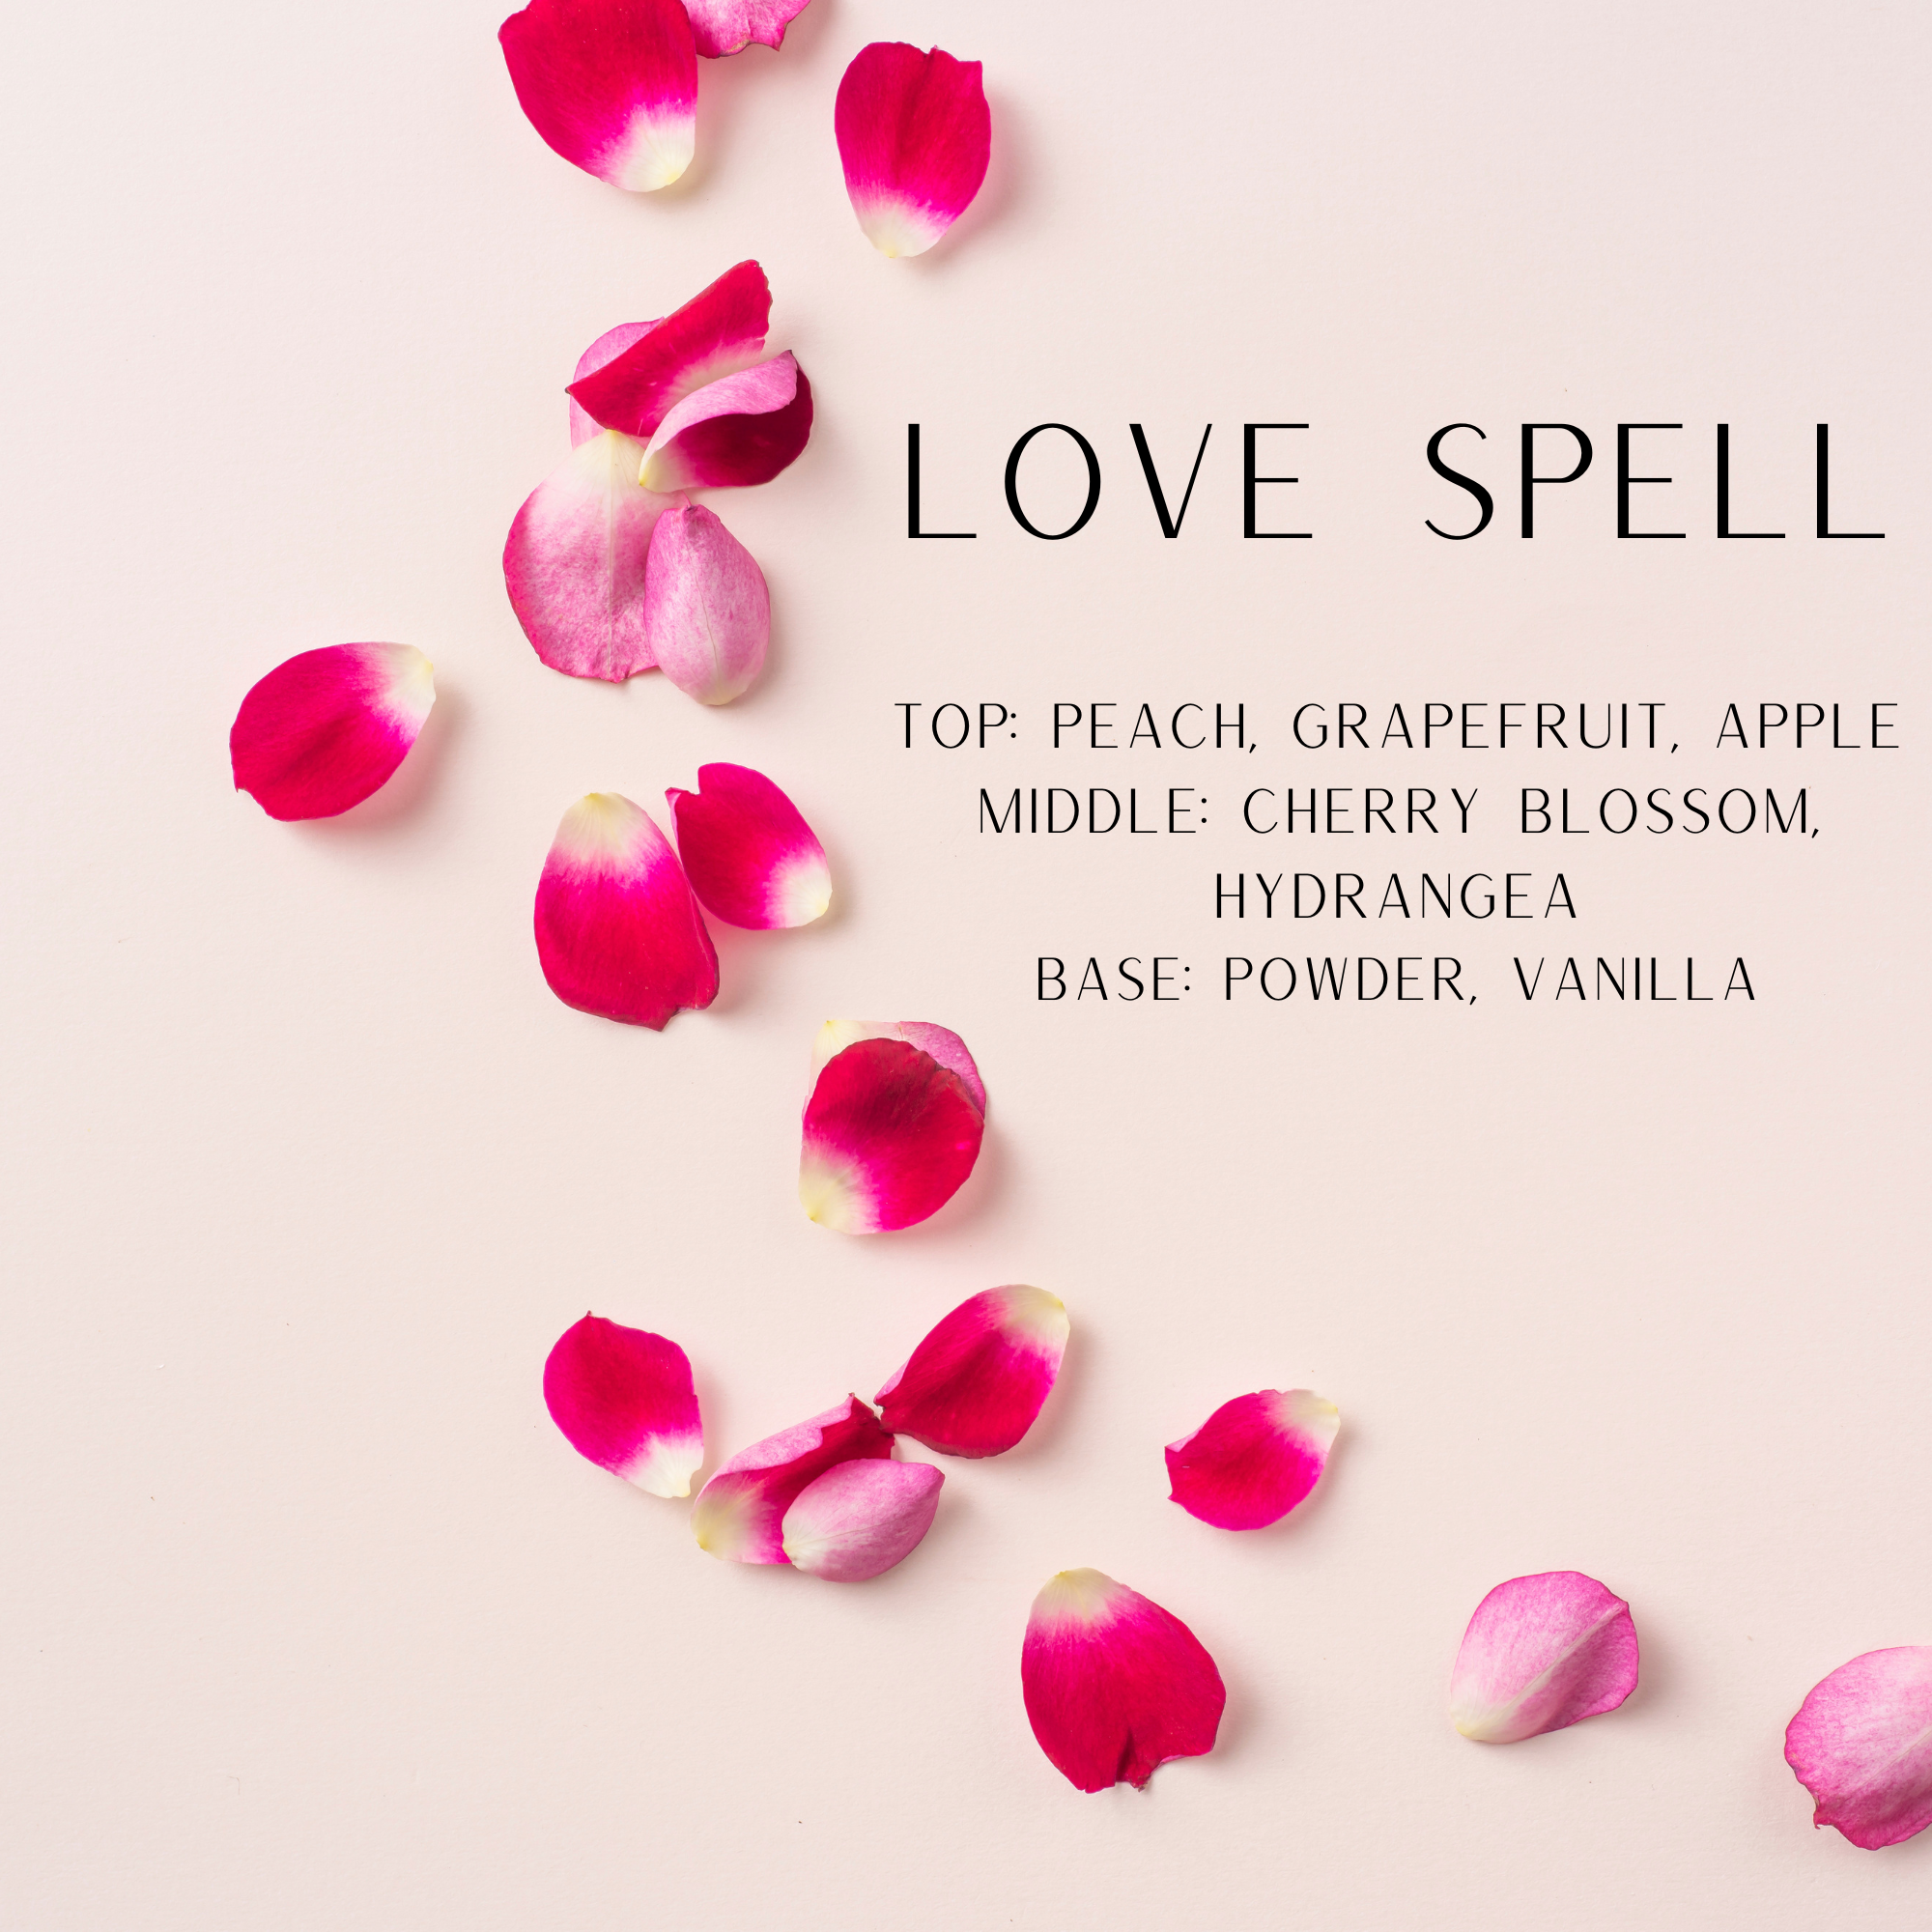 rose petals on a pink background says love spell top peach, grapefruit, apple middle: cherry blossom, hydrangea Base: powder, vanilla